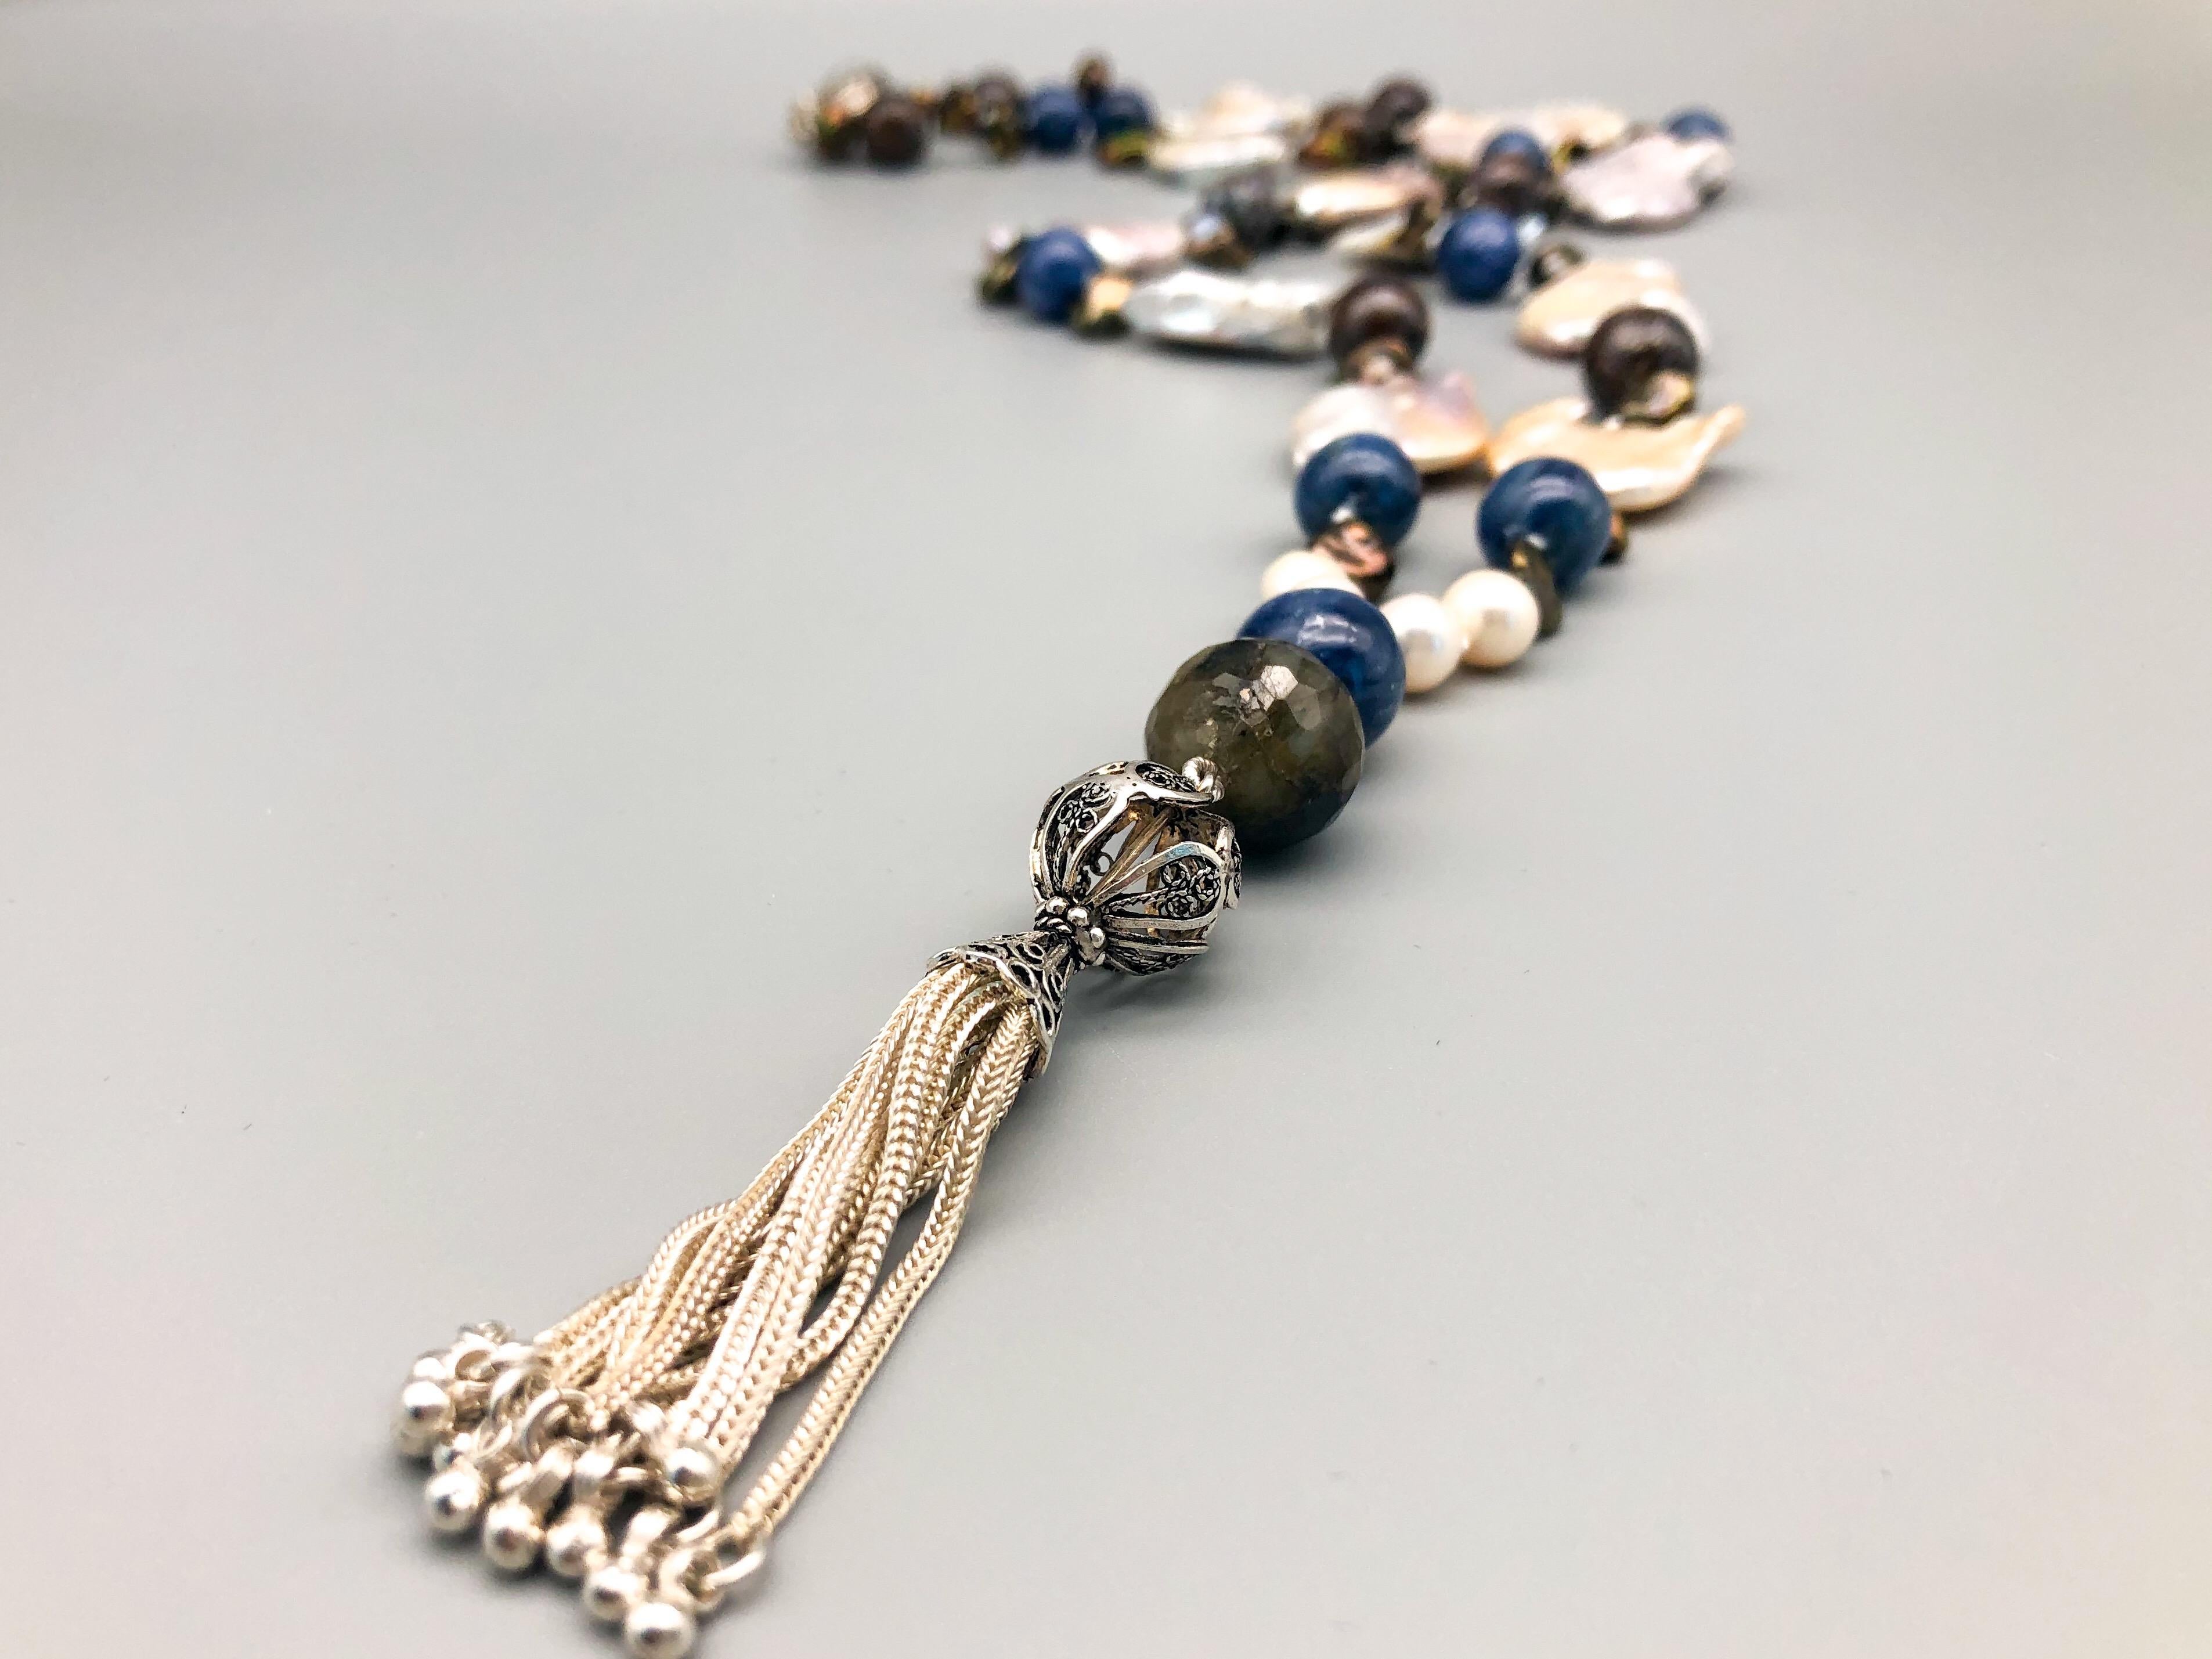 One-of-a-Kind
A fresh combination. mixes denim blue Kyanite and rich brown Australian Boulder opal separated by large baroque pearls. The pearls are of particular interest, as they are not only the familiar oddly shaped but flattened to maximize the